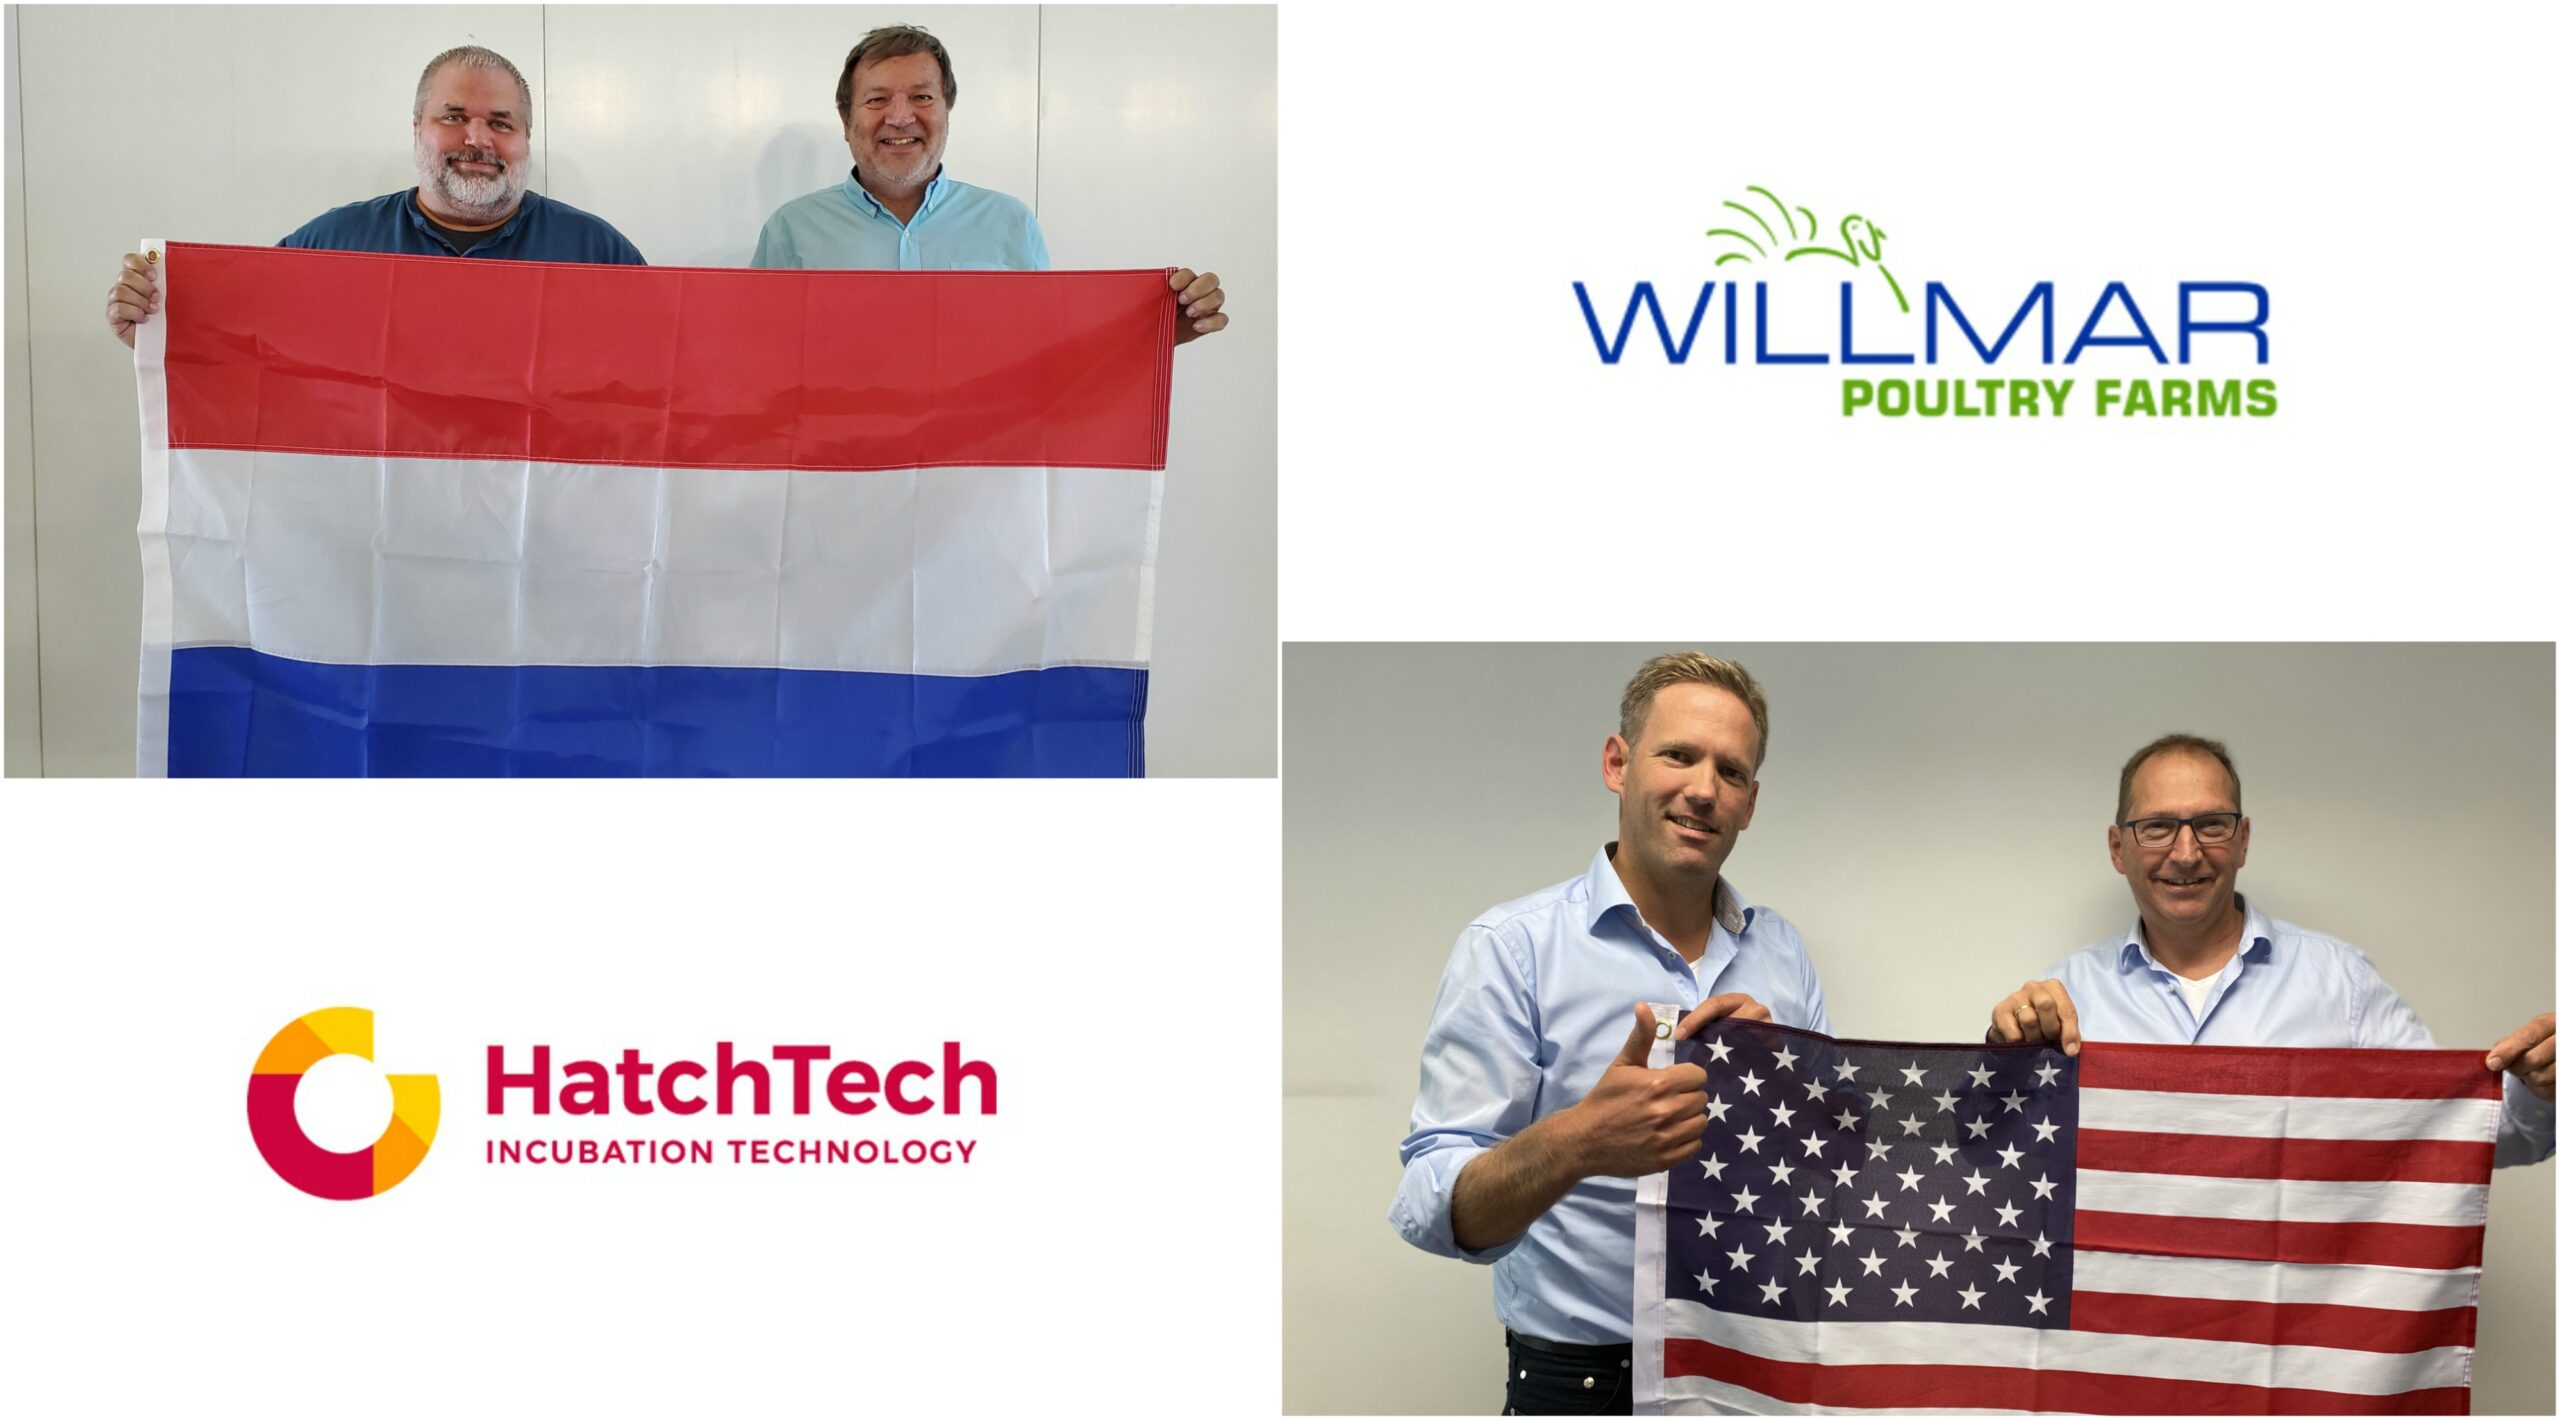 Willmar and HatchTech scaled